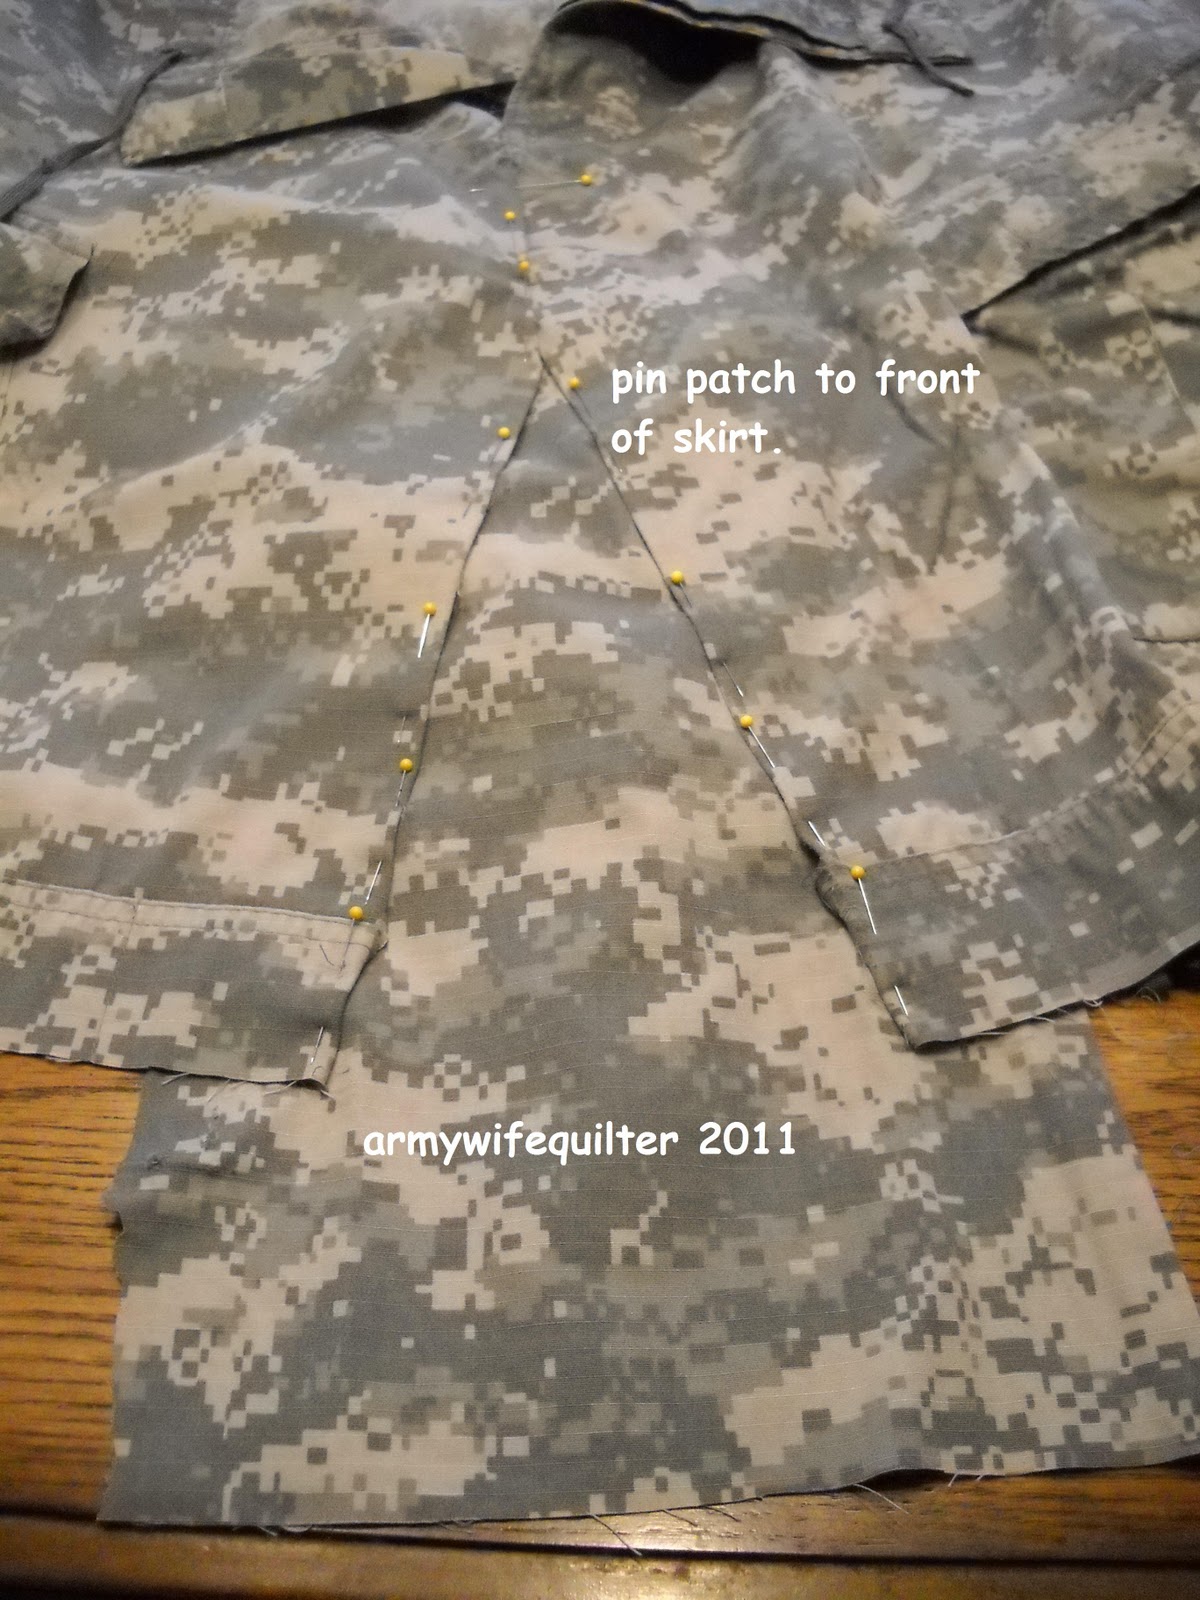 Army Wife Quilter: His and Hers ACU's